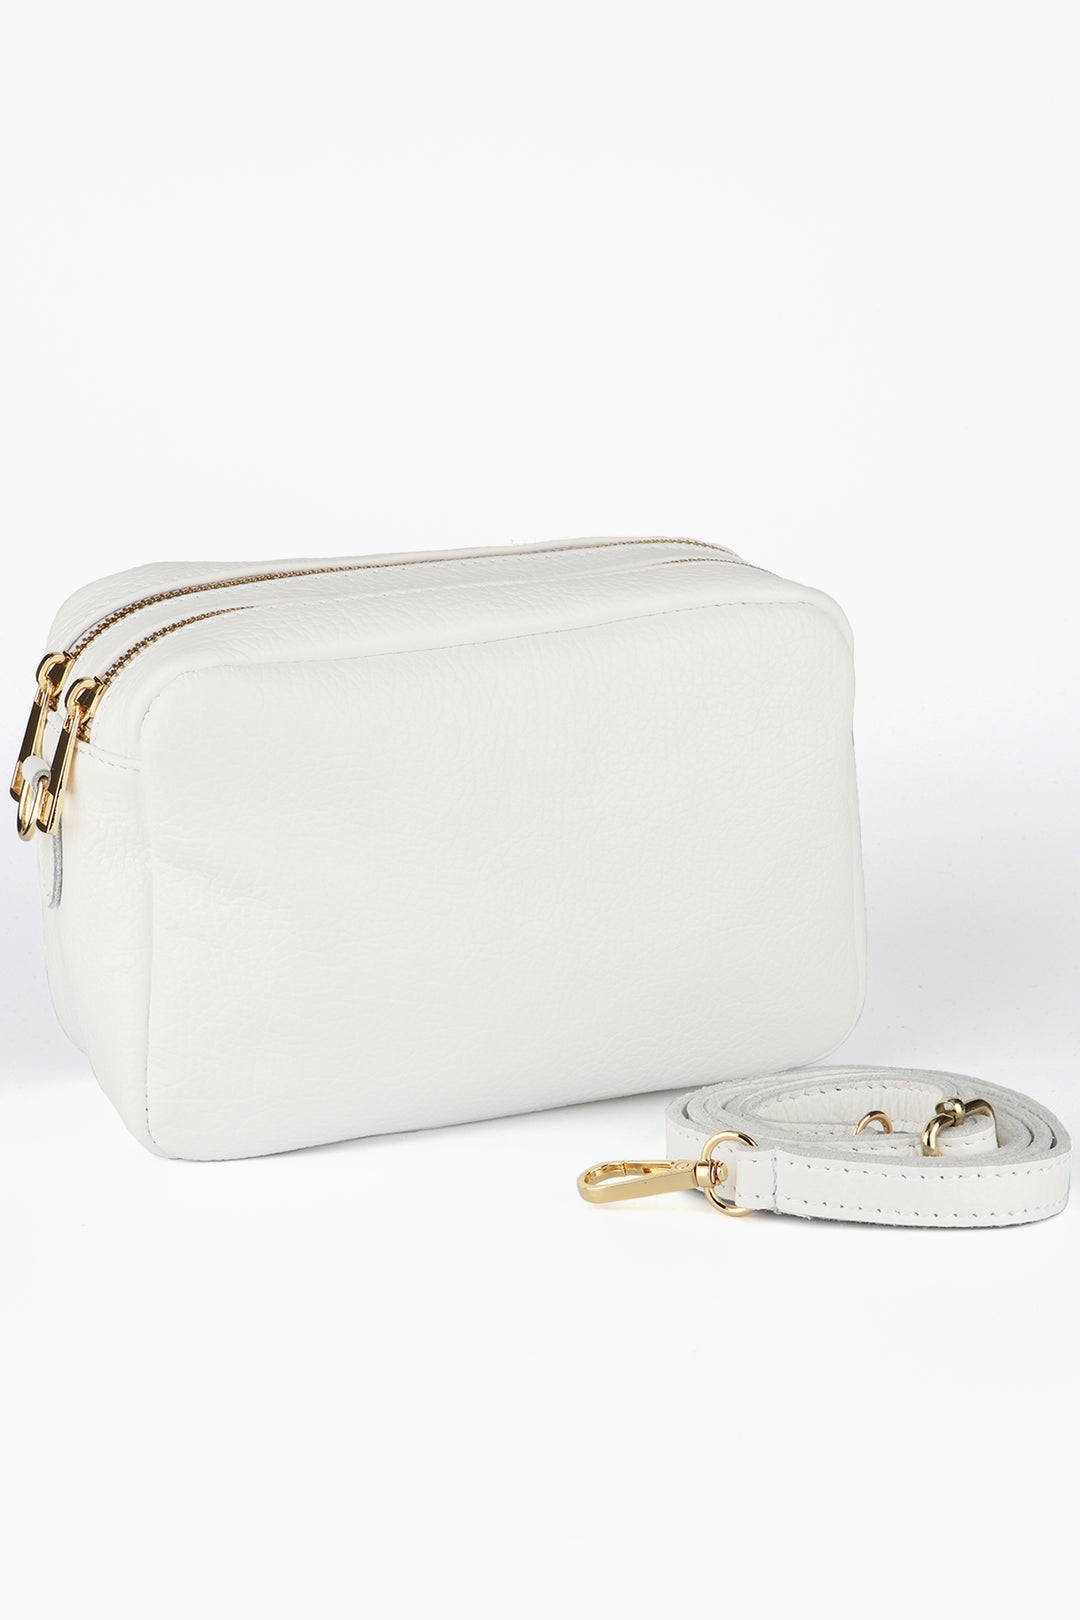 white leather cross body camera bag with two zip closing compartments and a detachable matching bag strap